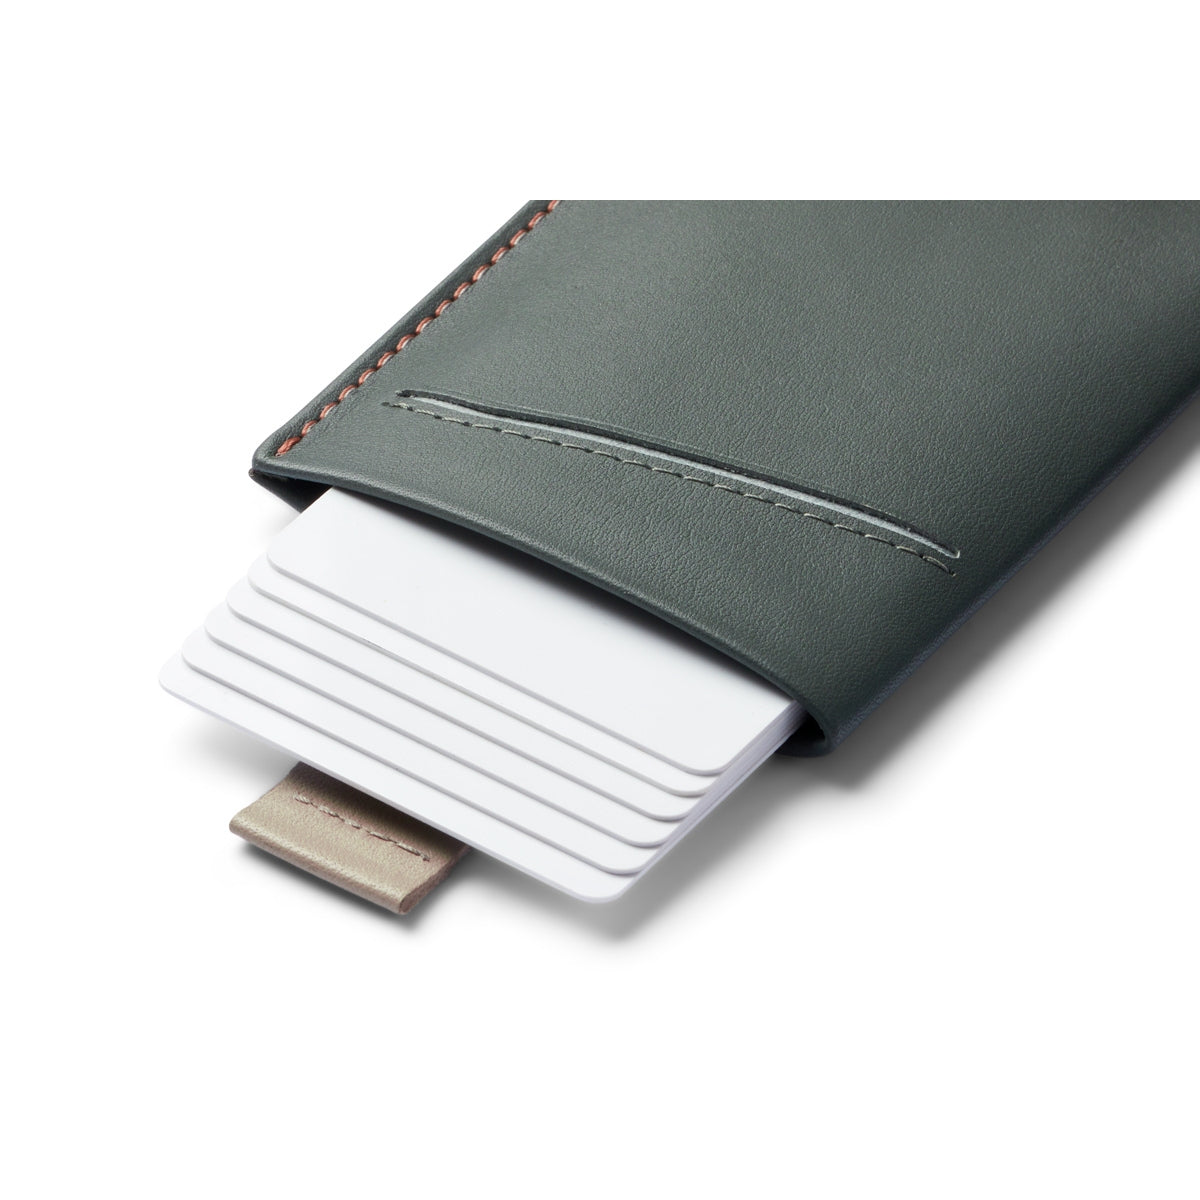 Bellroy Card Sleeve (Second Edition) in Evergreen